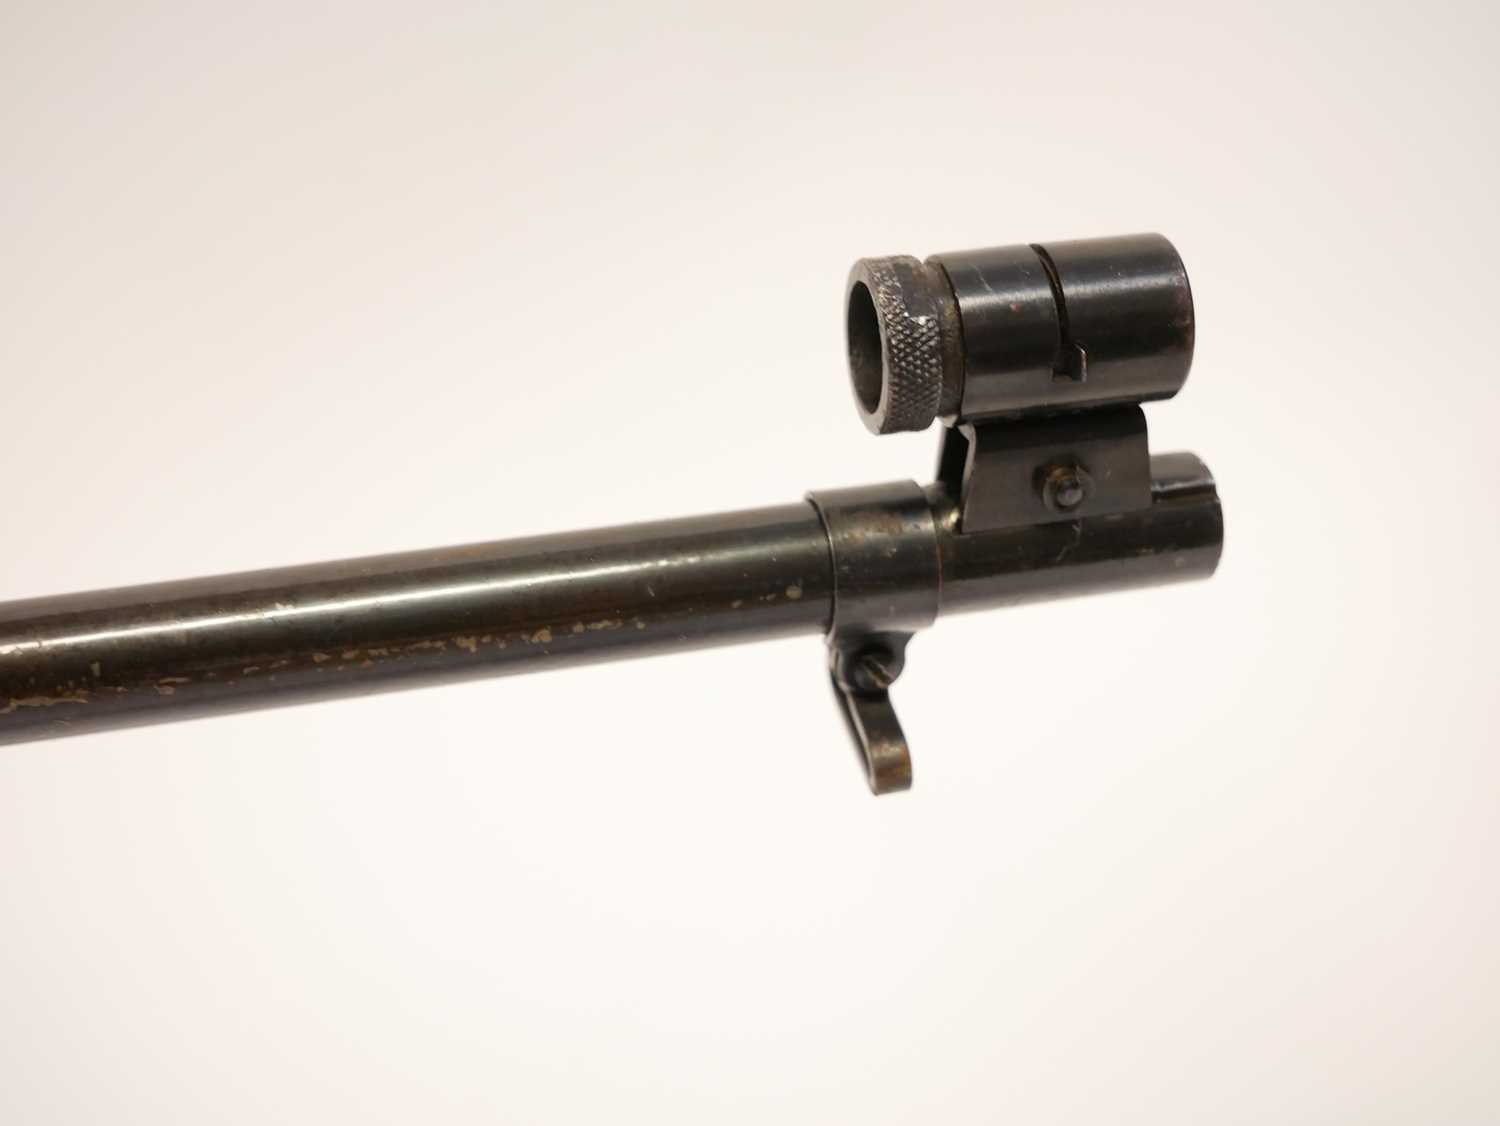 Original model 50 .22 air rifle, serial number 71371623, 18.5 inch barrel with tunnel front sight - Image 7 of 13